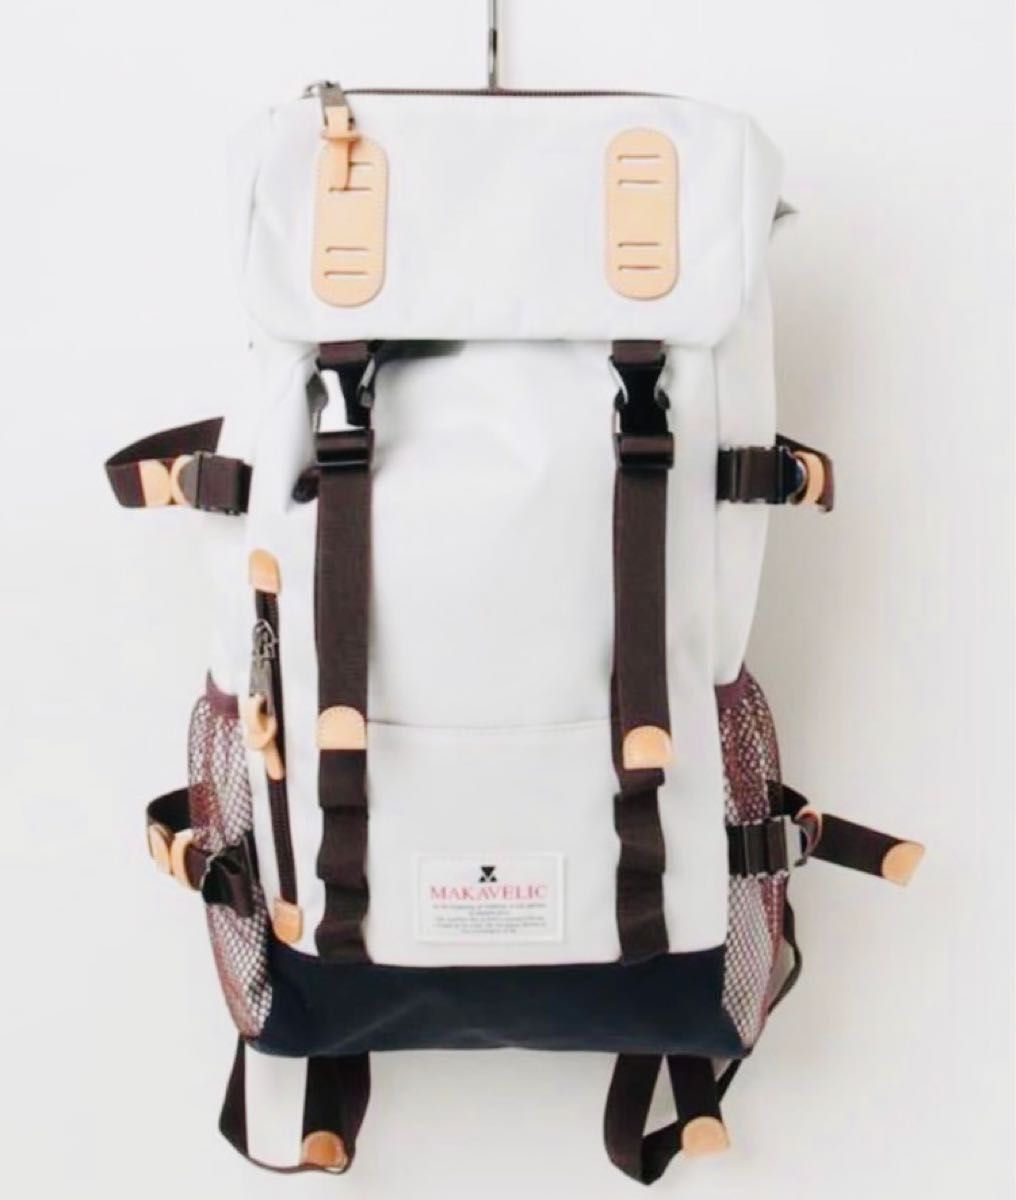 MAKAVELIC マキャベリック DOUBLE LINE BACKPACK BLACK EDITION 